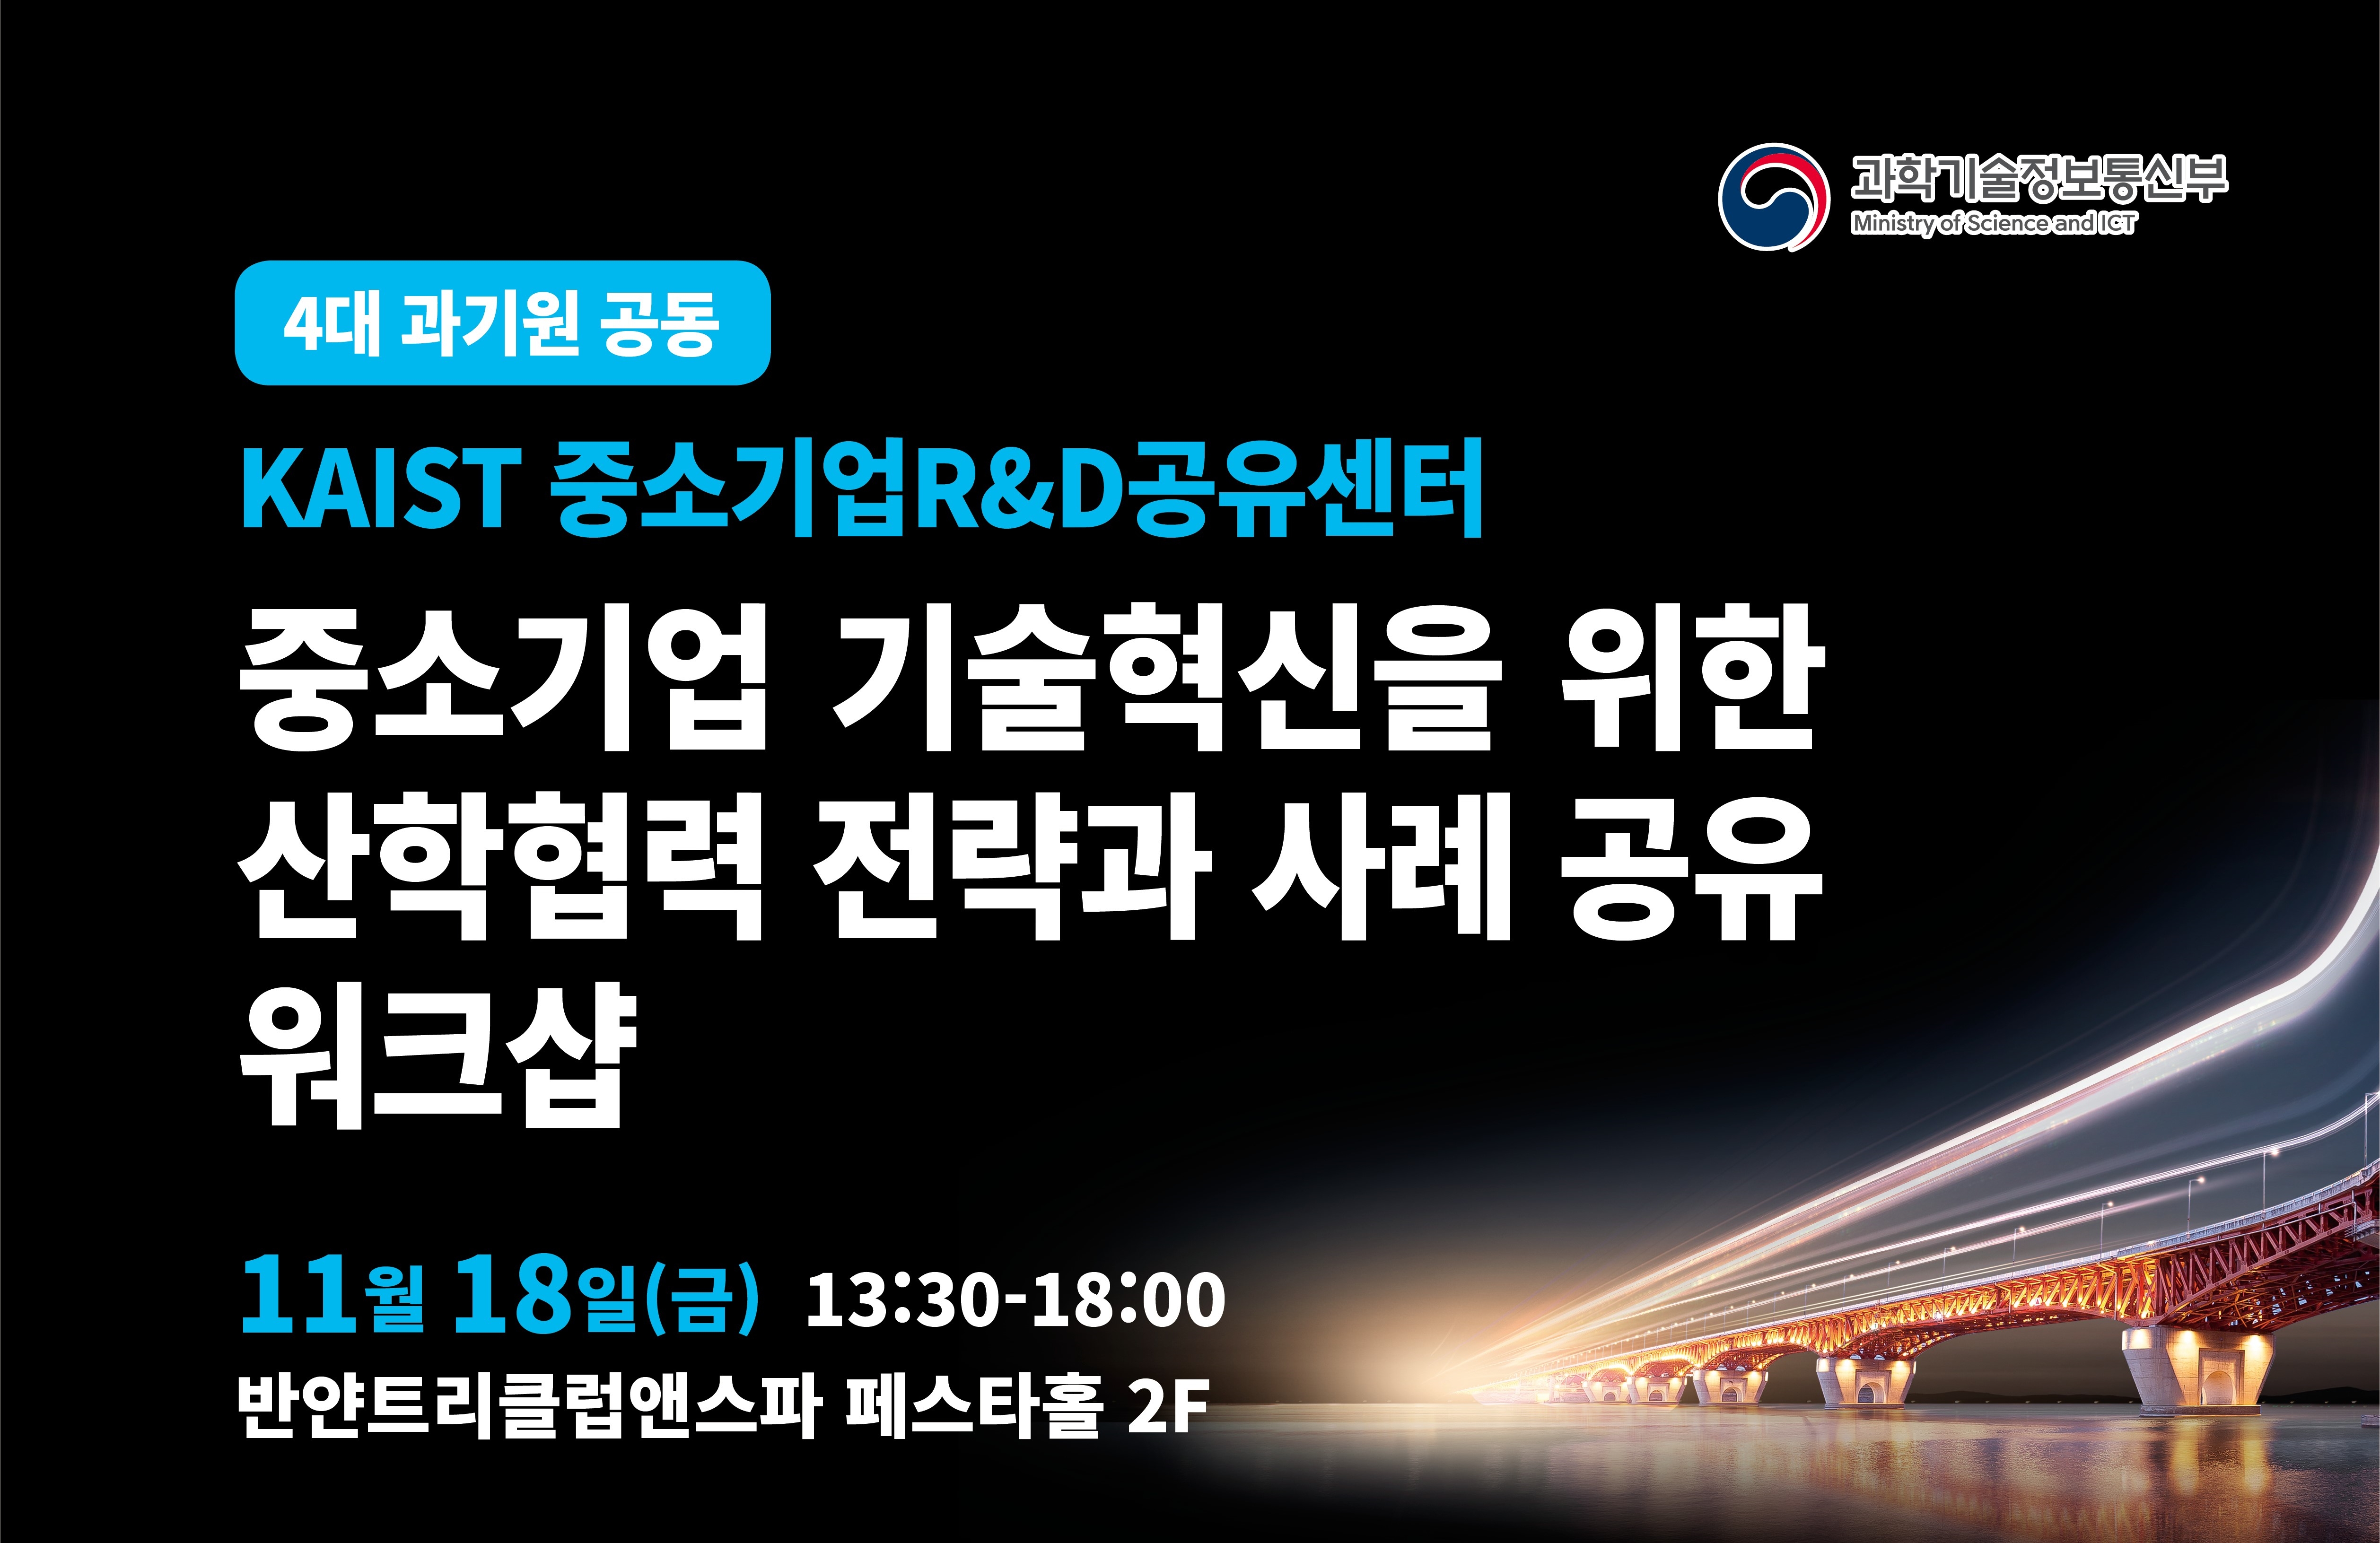 KAIST Small Business R&D Sharing Center held 'Industry-University Cooperation Strategy and Case Sharing Workshop for Small Business Technology Innovation' 이미지